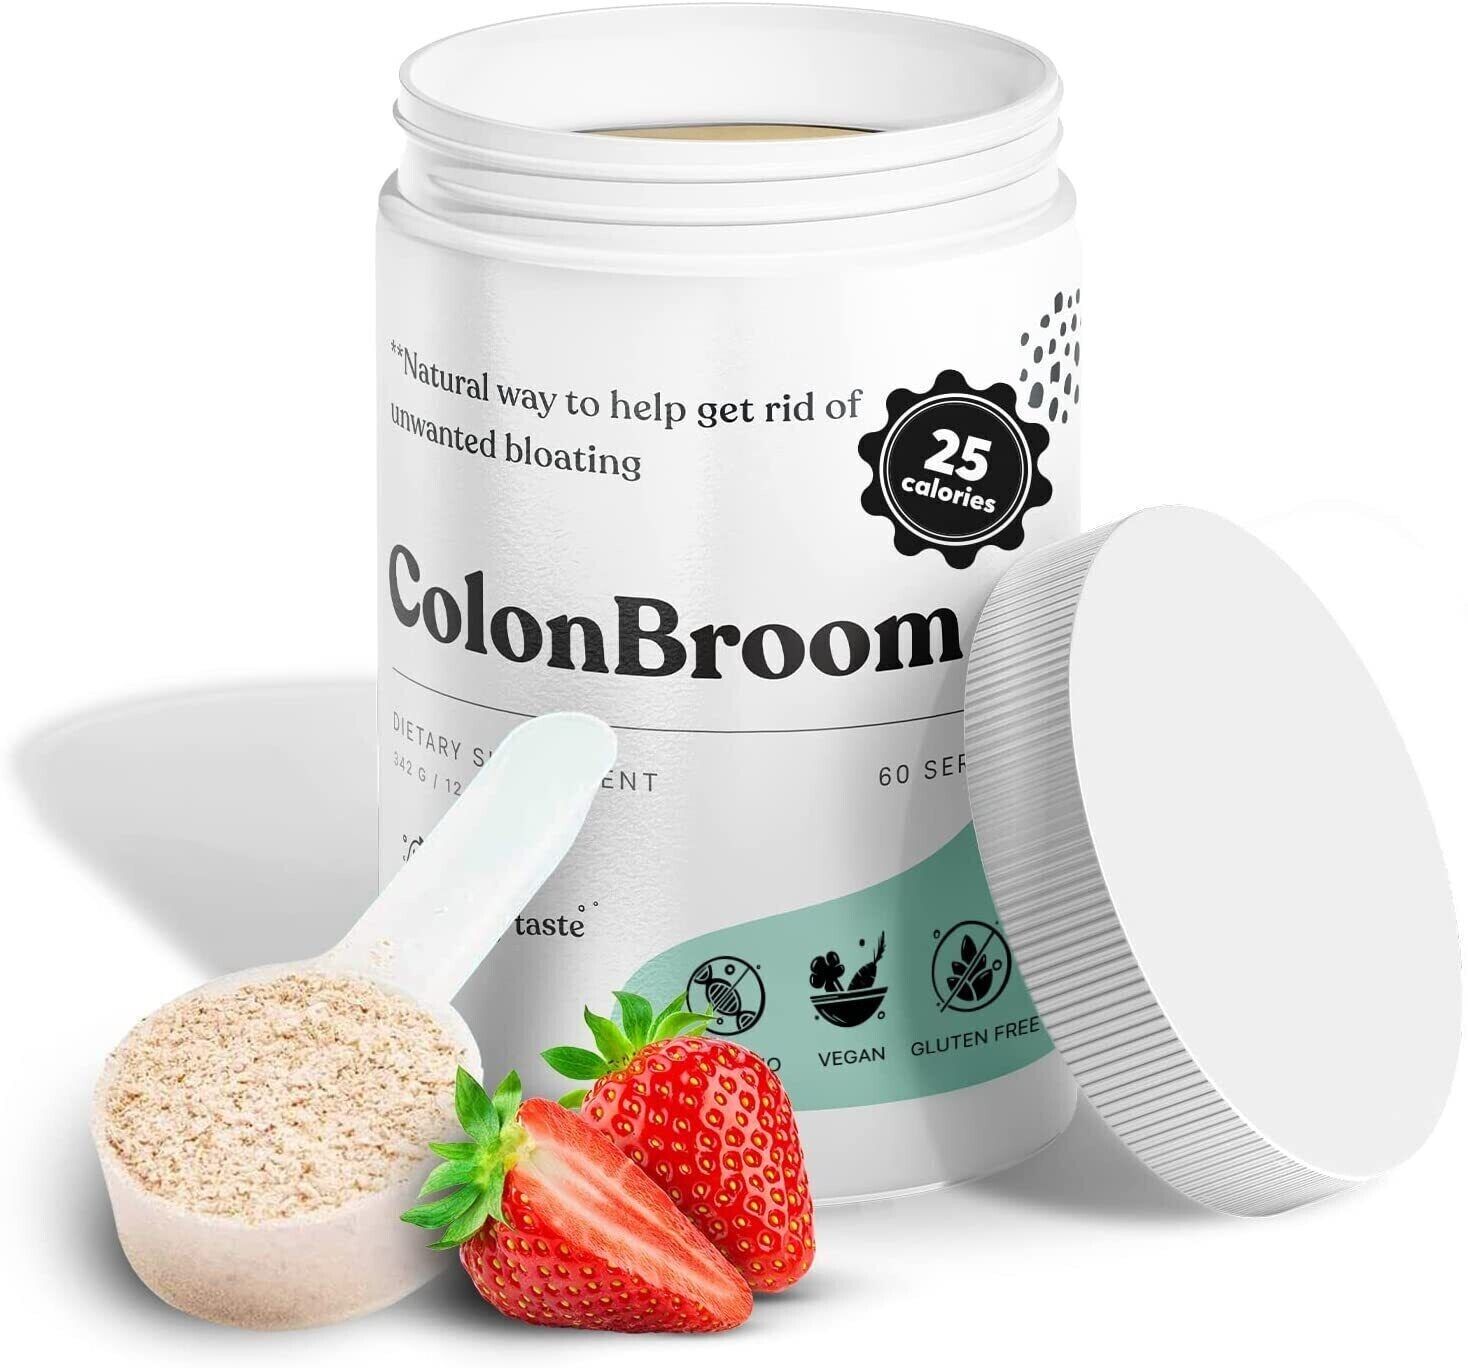 colon broom real reviews consumer reports - products - amazon - walmart